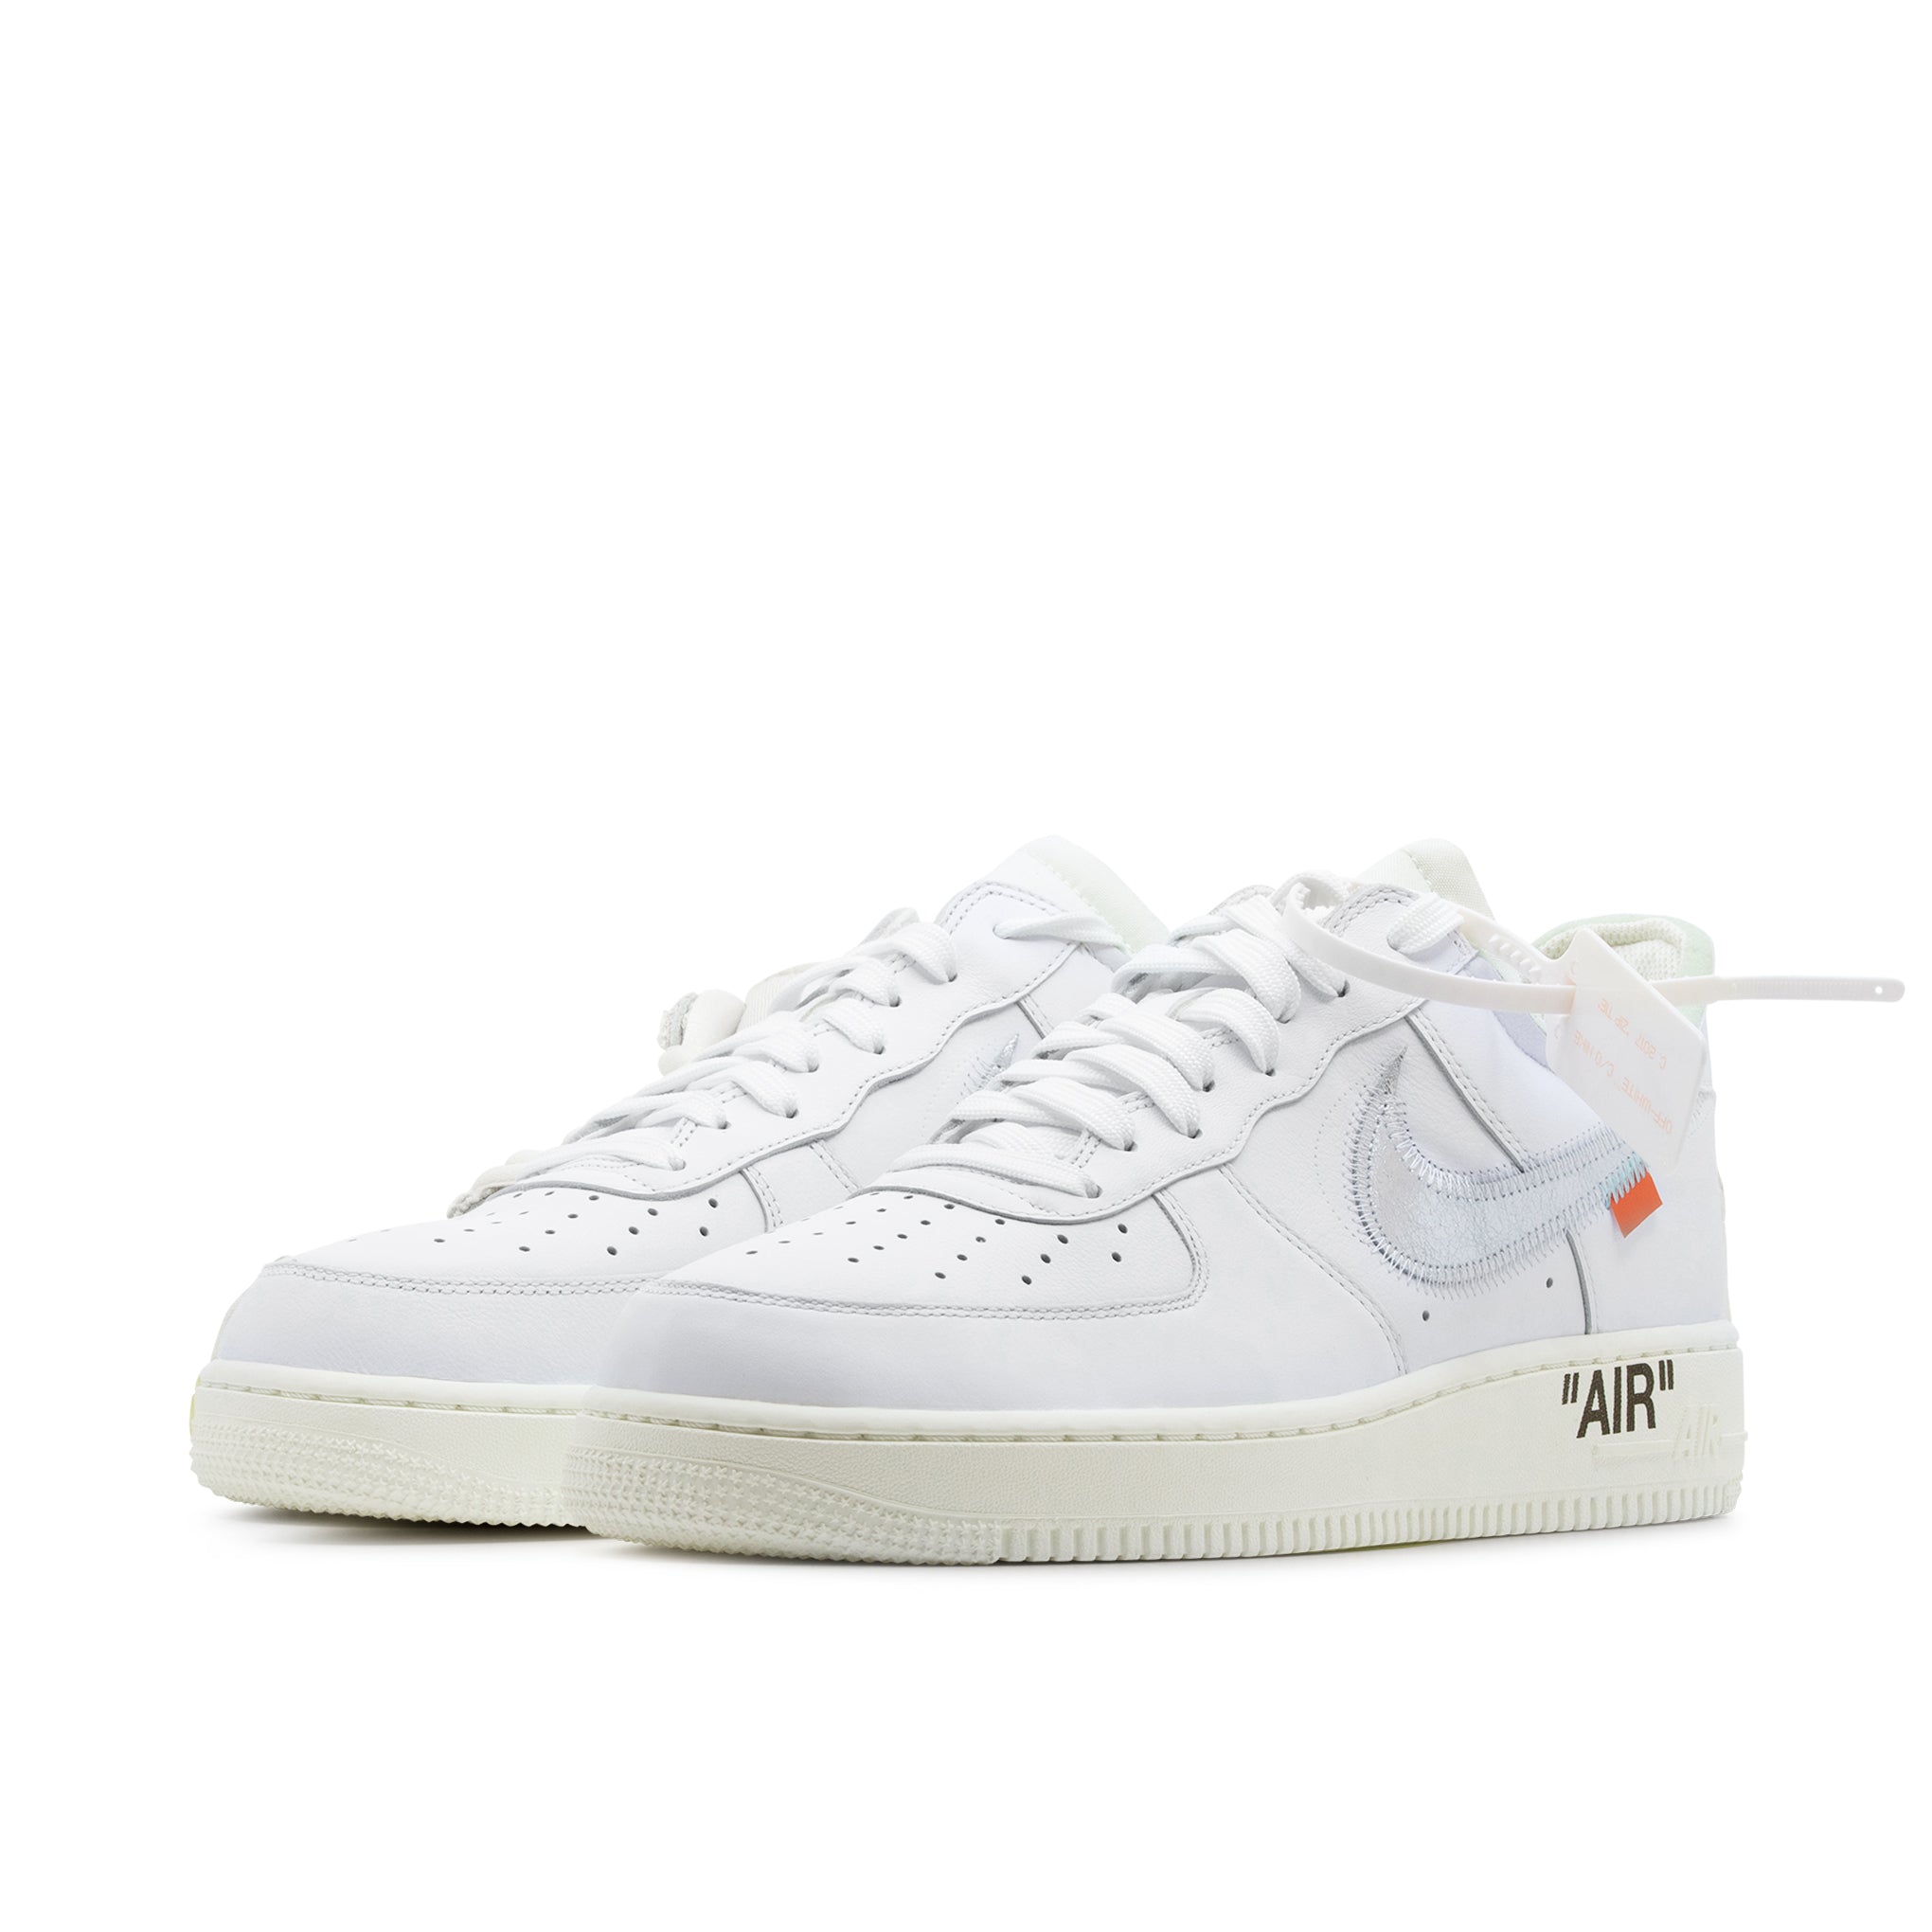 Custom Off-White Nike Air Force 1 Low Complexcon Bahrain